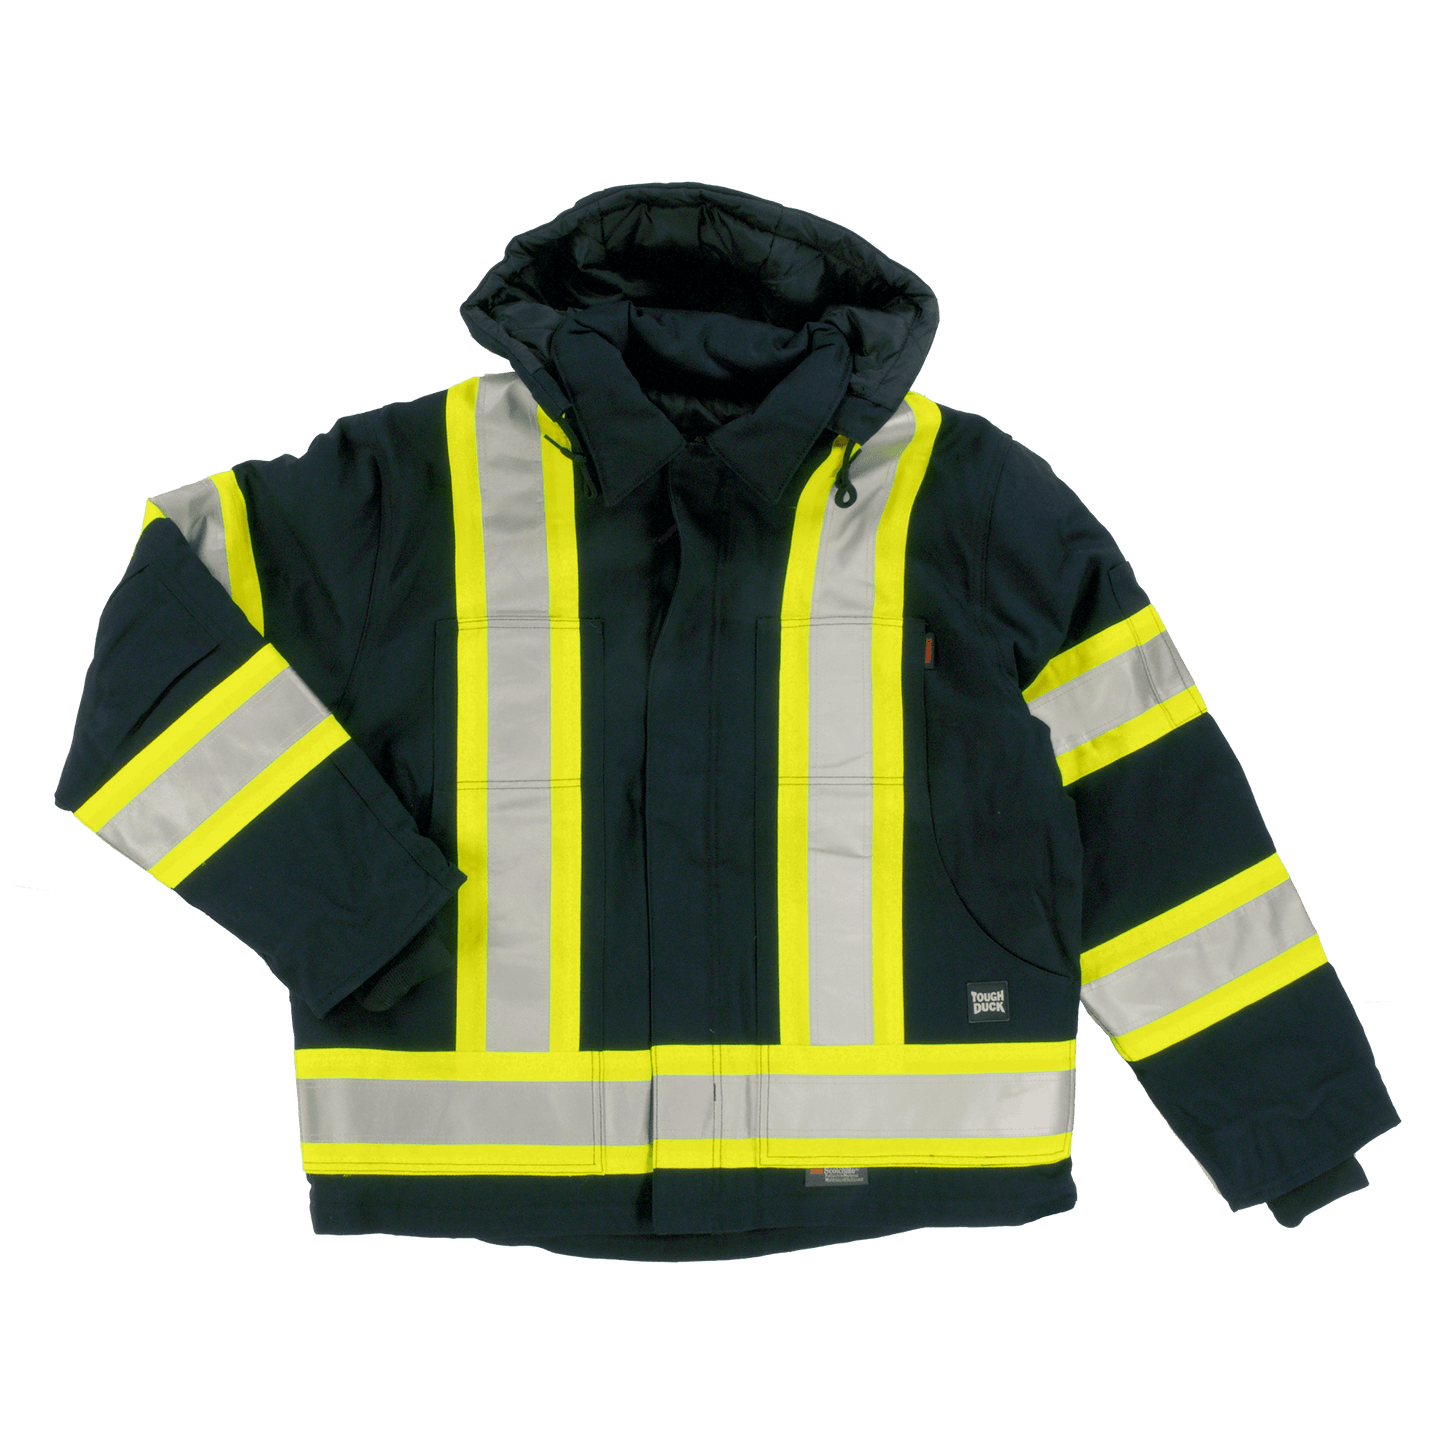 High Visibility Cotton Duck Safety Jacket S457 by Tough Duck